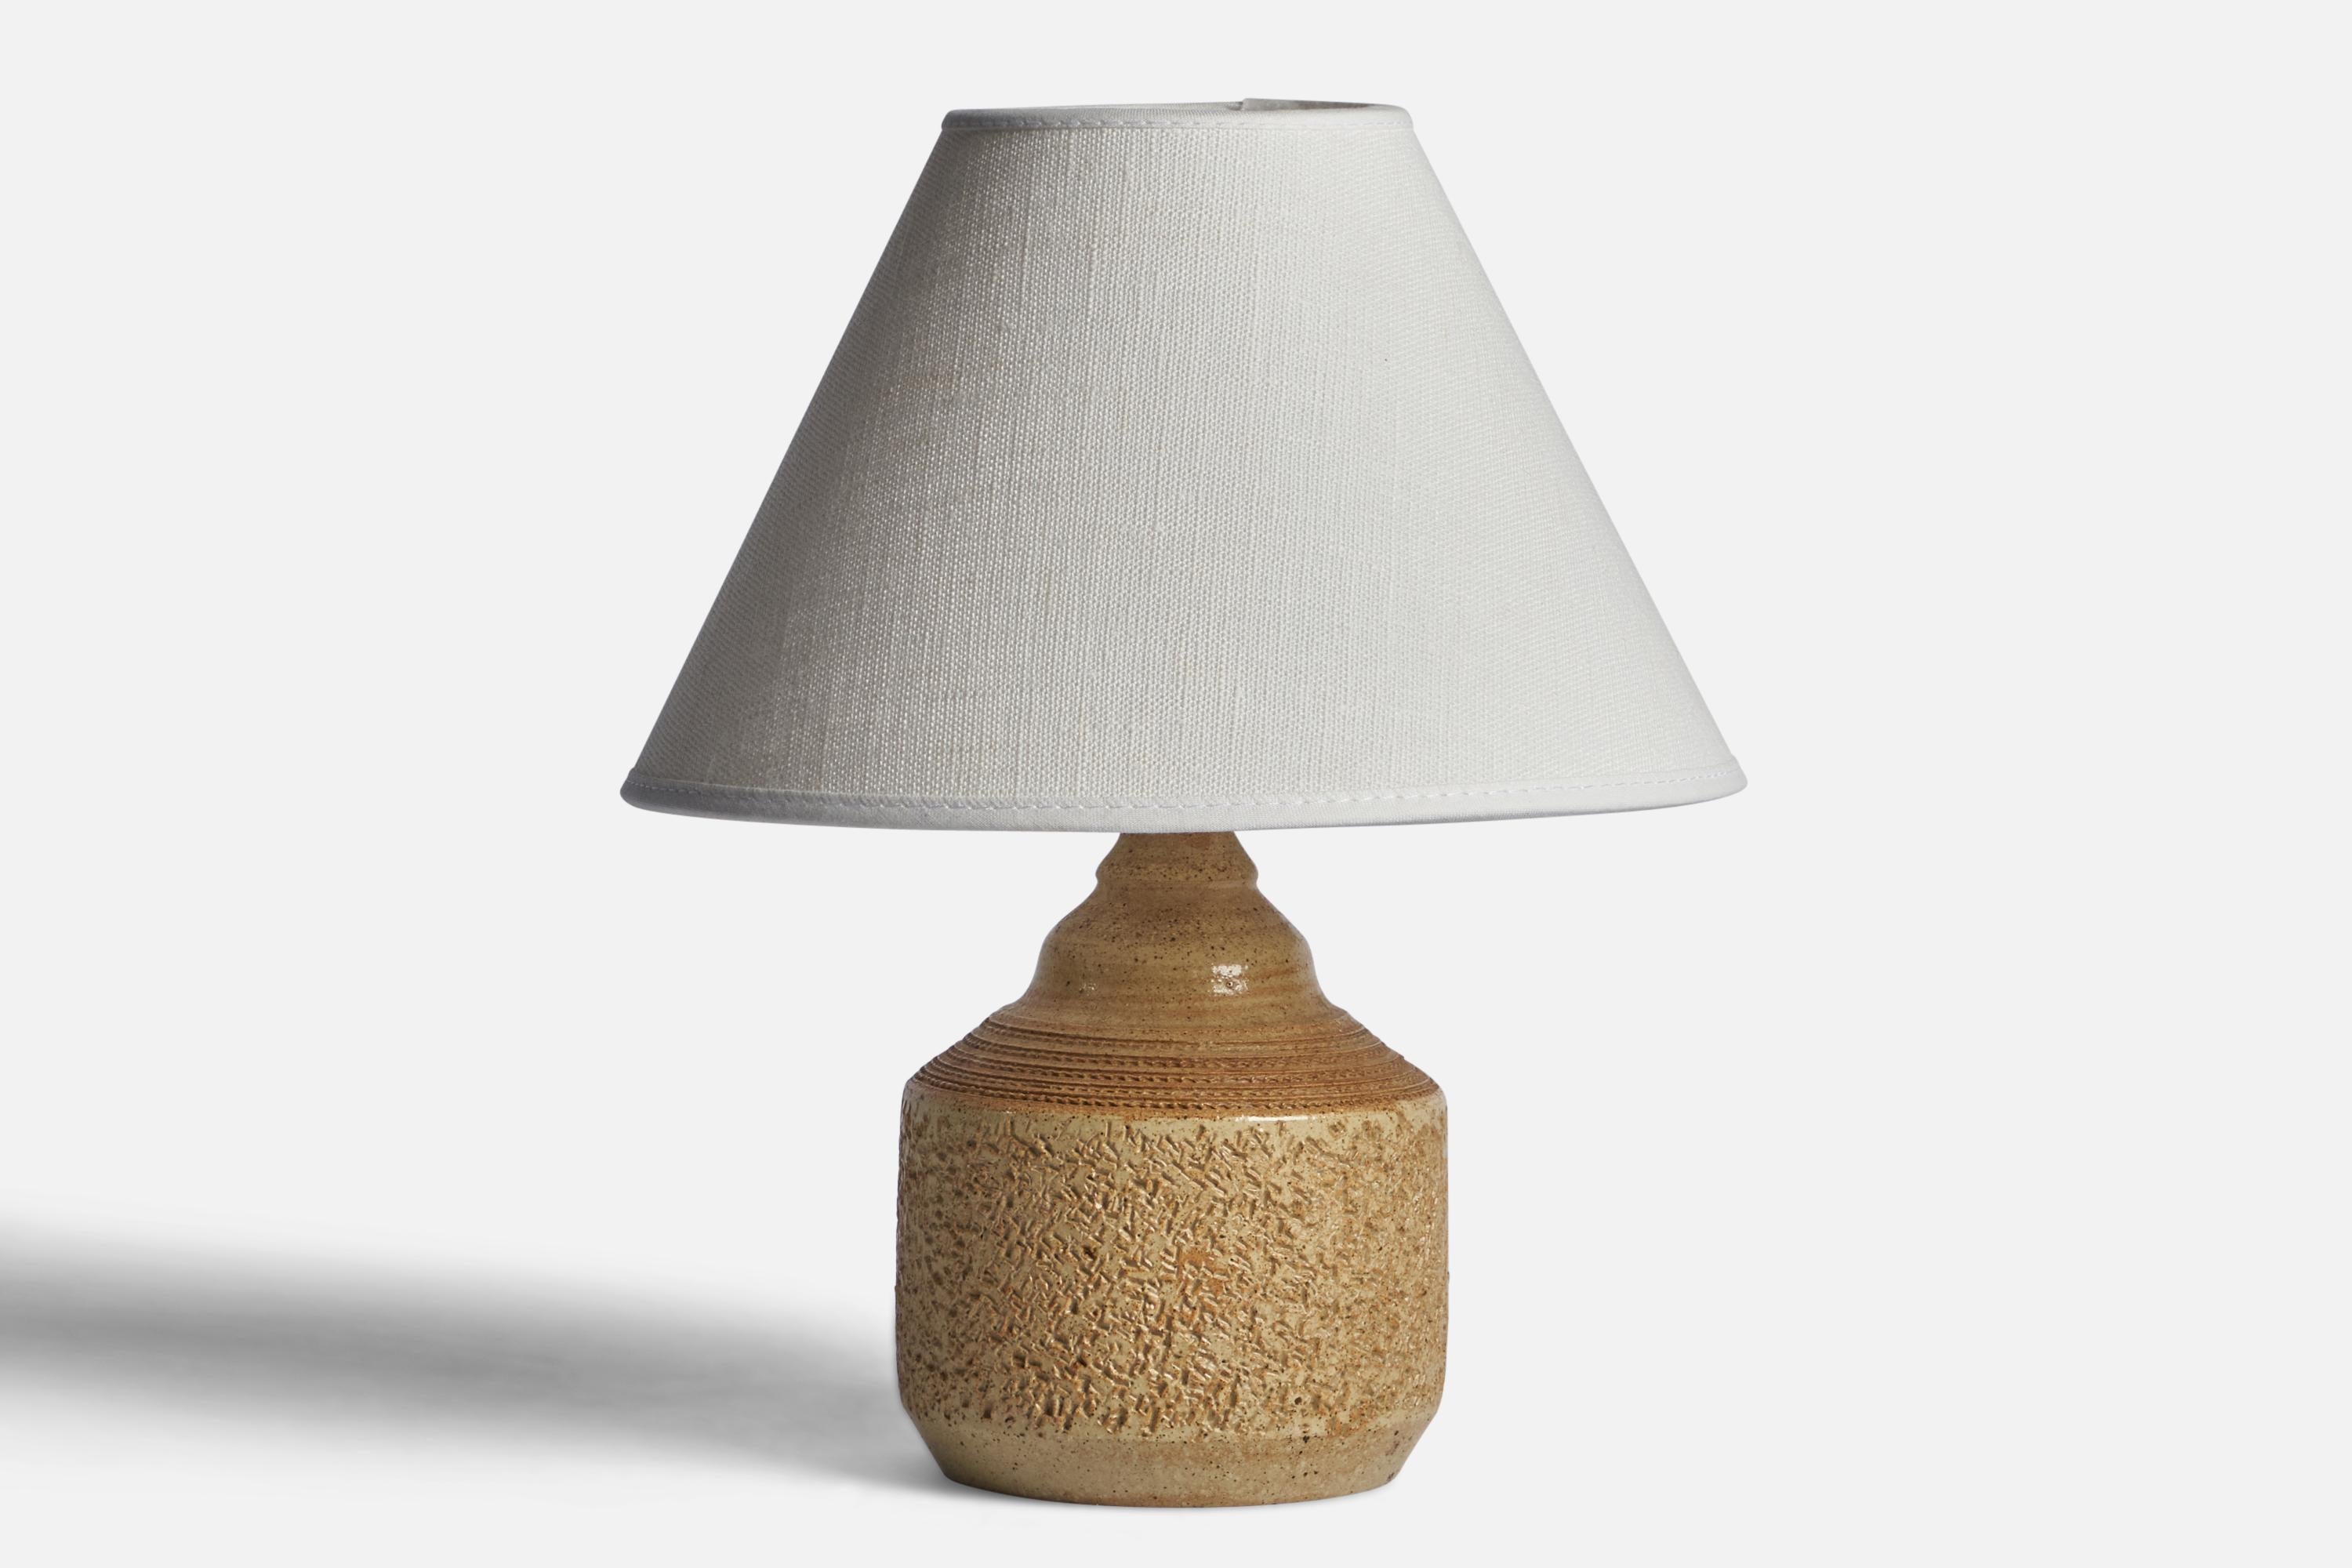 A small brown and beige-glazed stoneware table lamp designed and produced by Klas Svensson, Höganäs, Sweden, c. 1960s.

Dimensions of Lamp (inches): 7.25” H x 3.9” Diameter
Dimensions of Shade (inches): 3” Top Diameter x 8” Bottom Diameter x 5” H